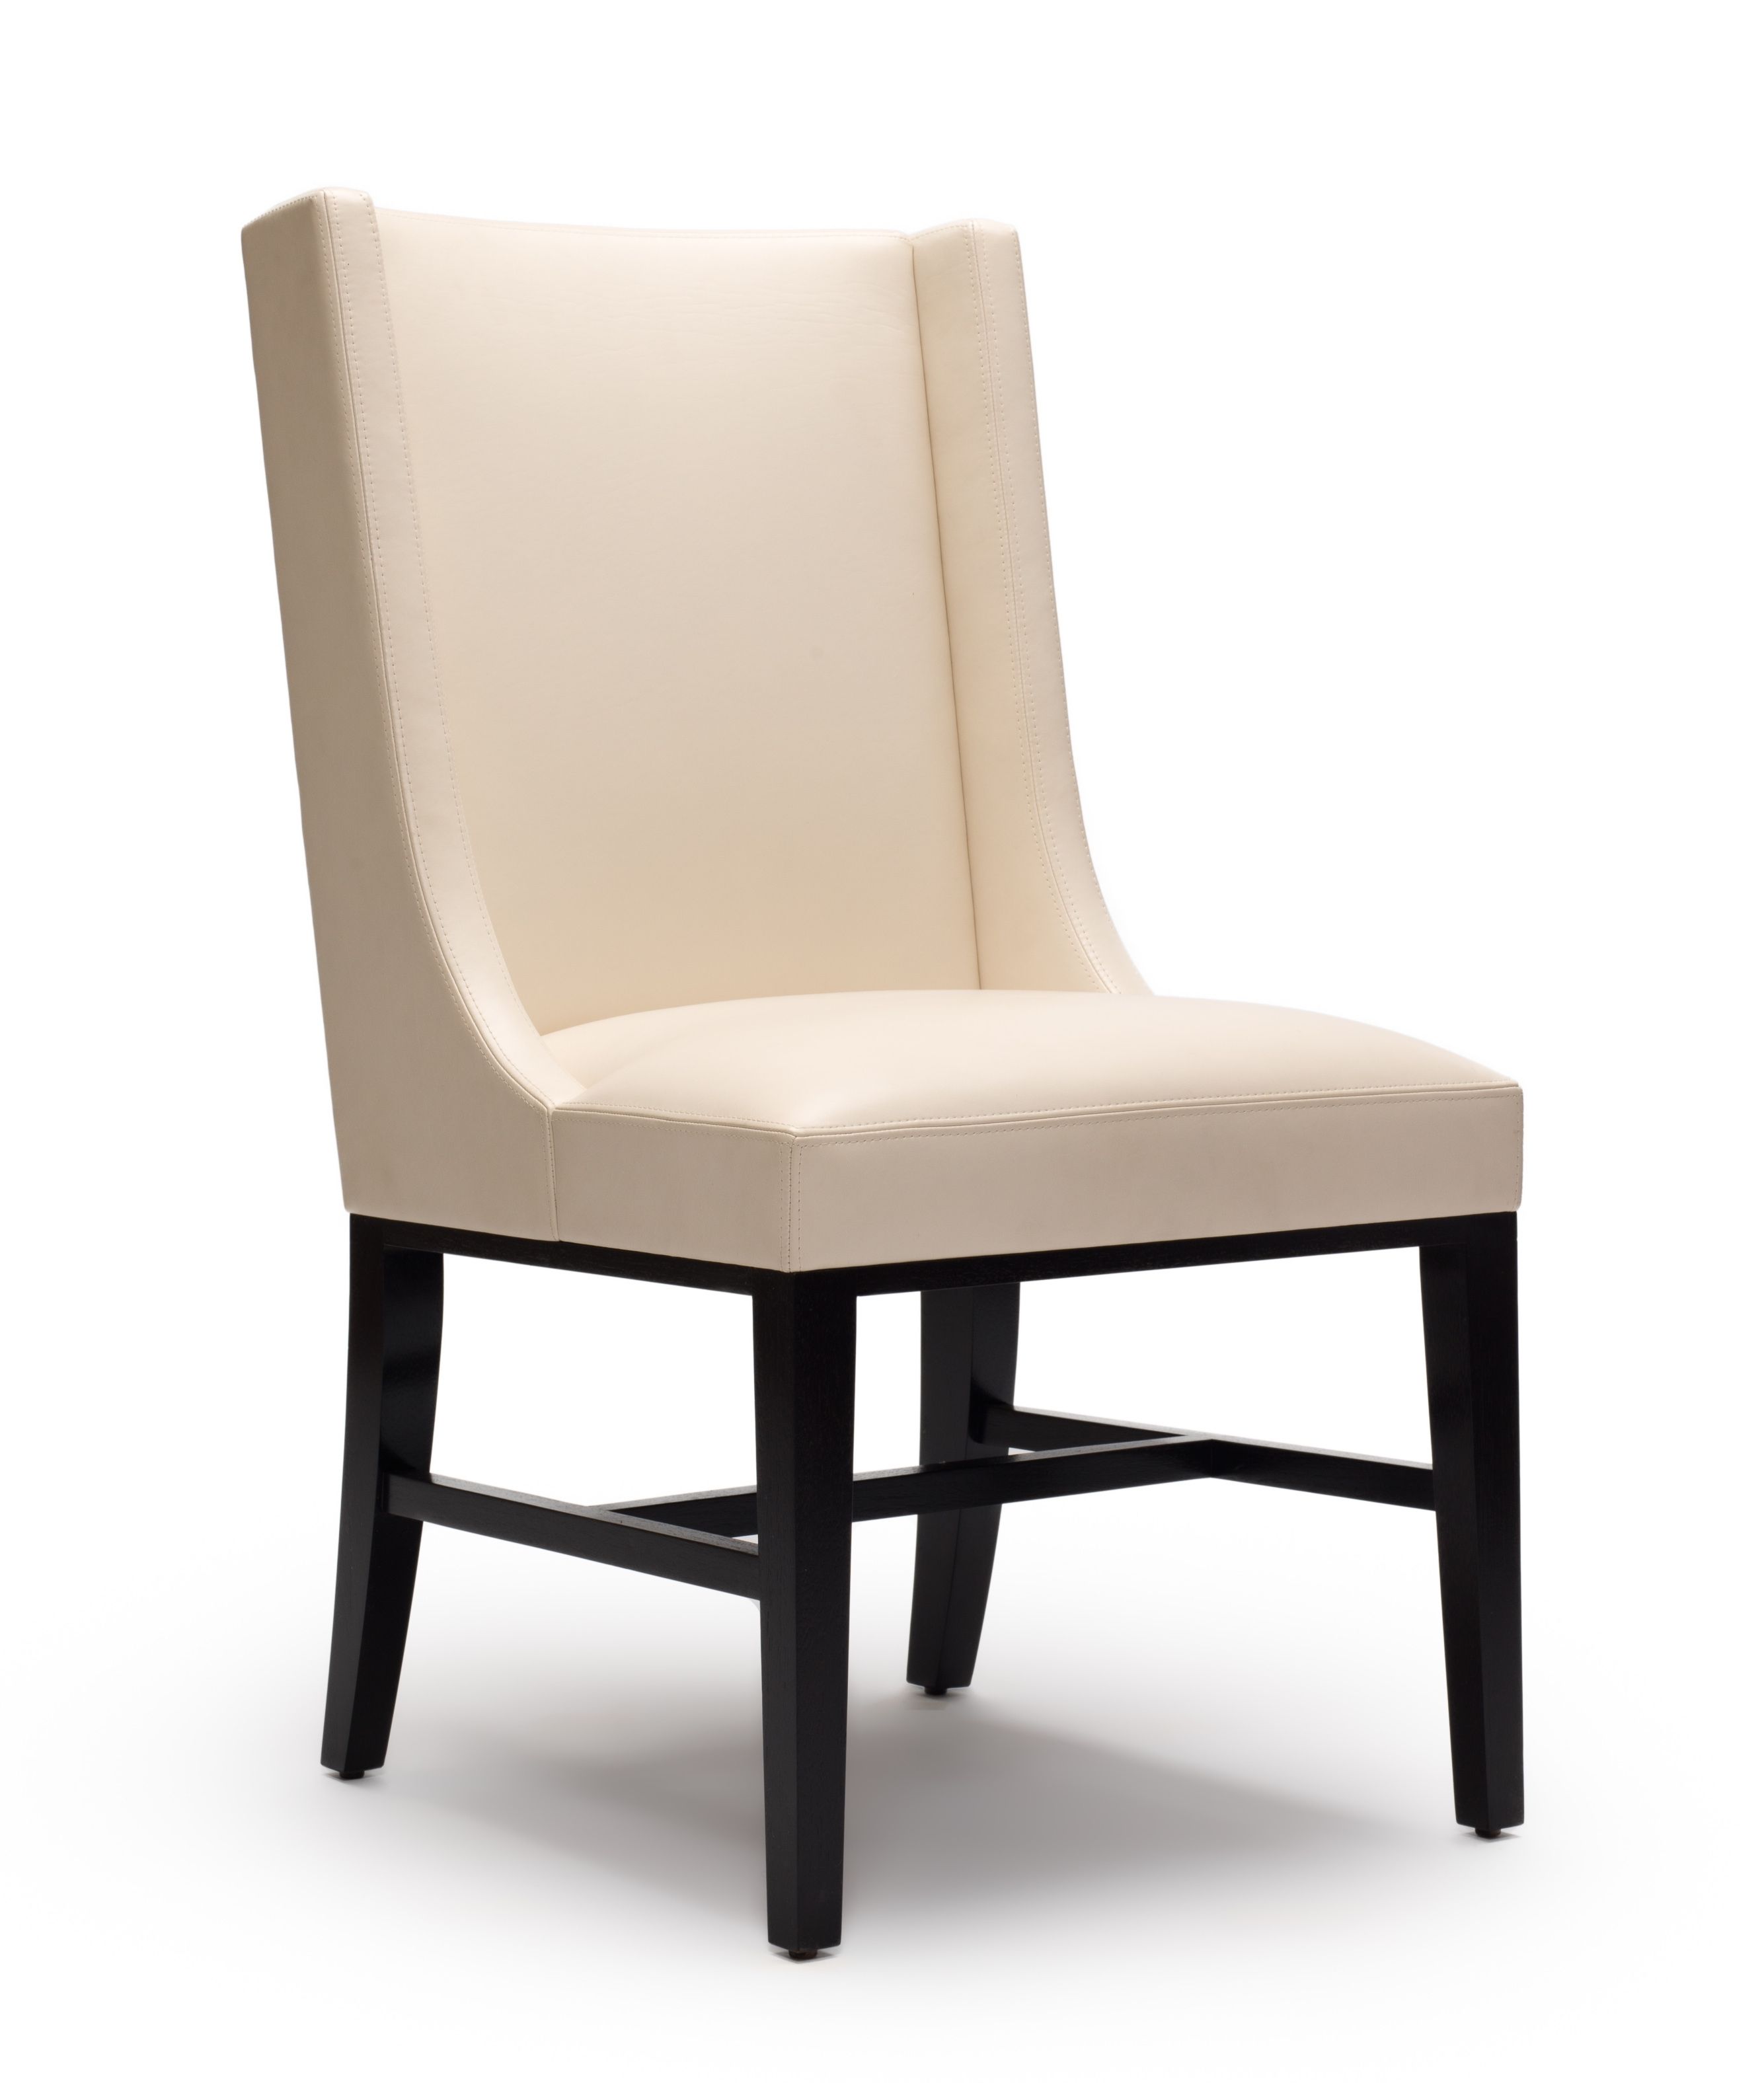 Alexa Grey Side Chairs Regarding Well Known Anees Upholstery : Dennis Miller Associates Fine Contemporary (View 17 of 20)